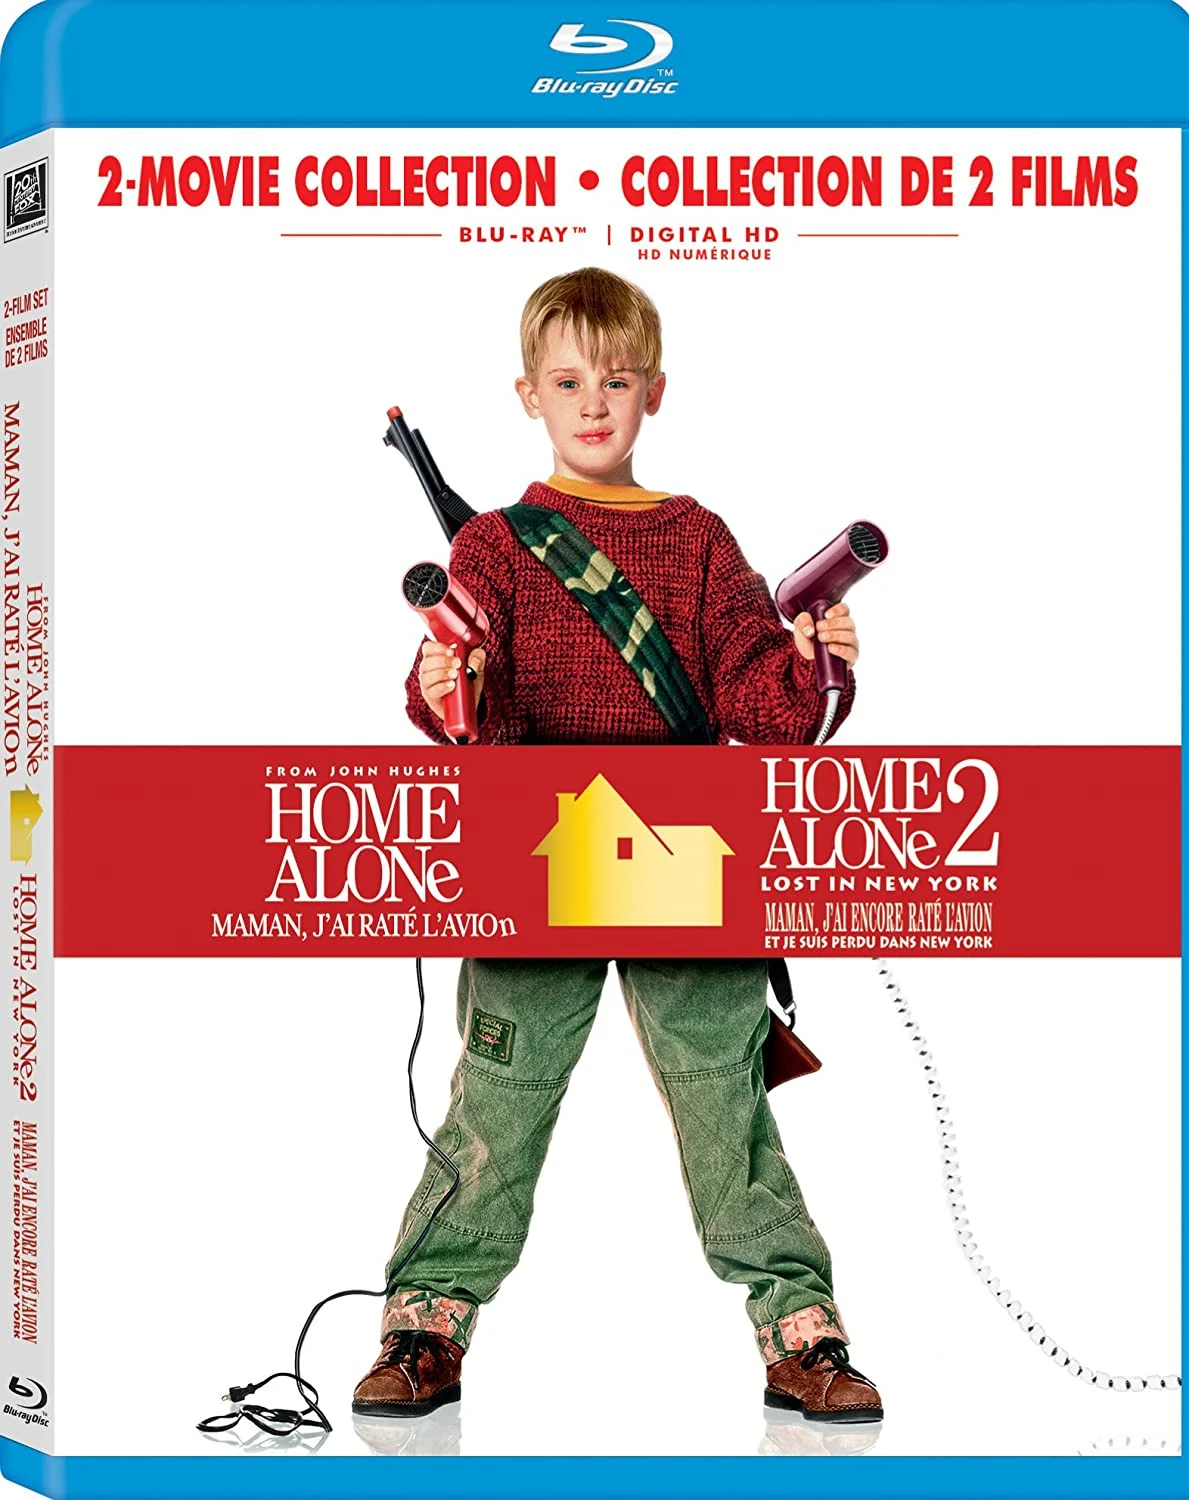 Home Alone & Home Alone 2: Lost In New York (Blu-ray) on MovieShack